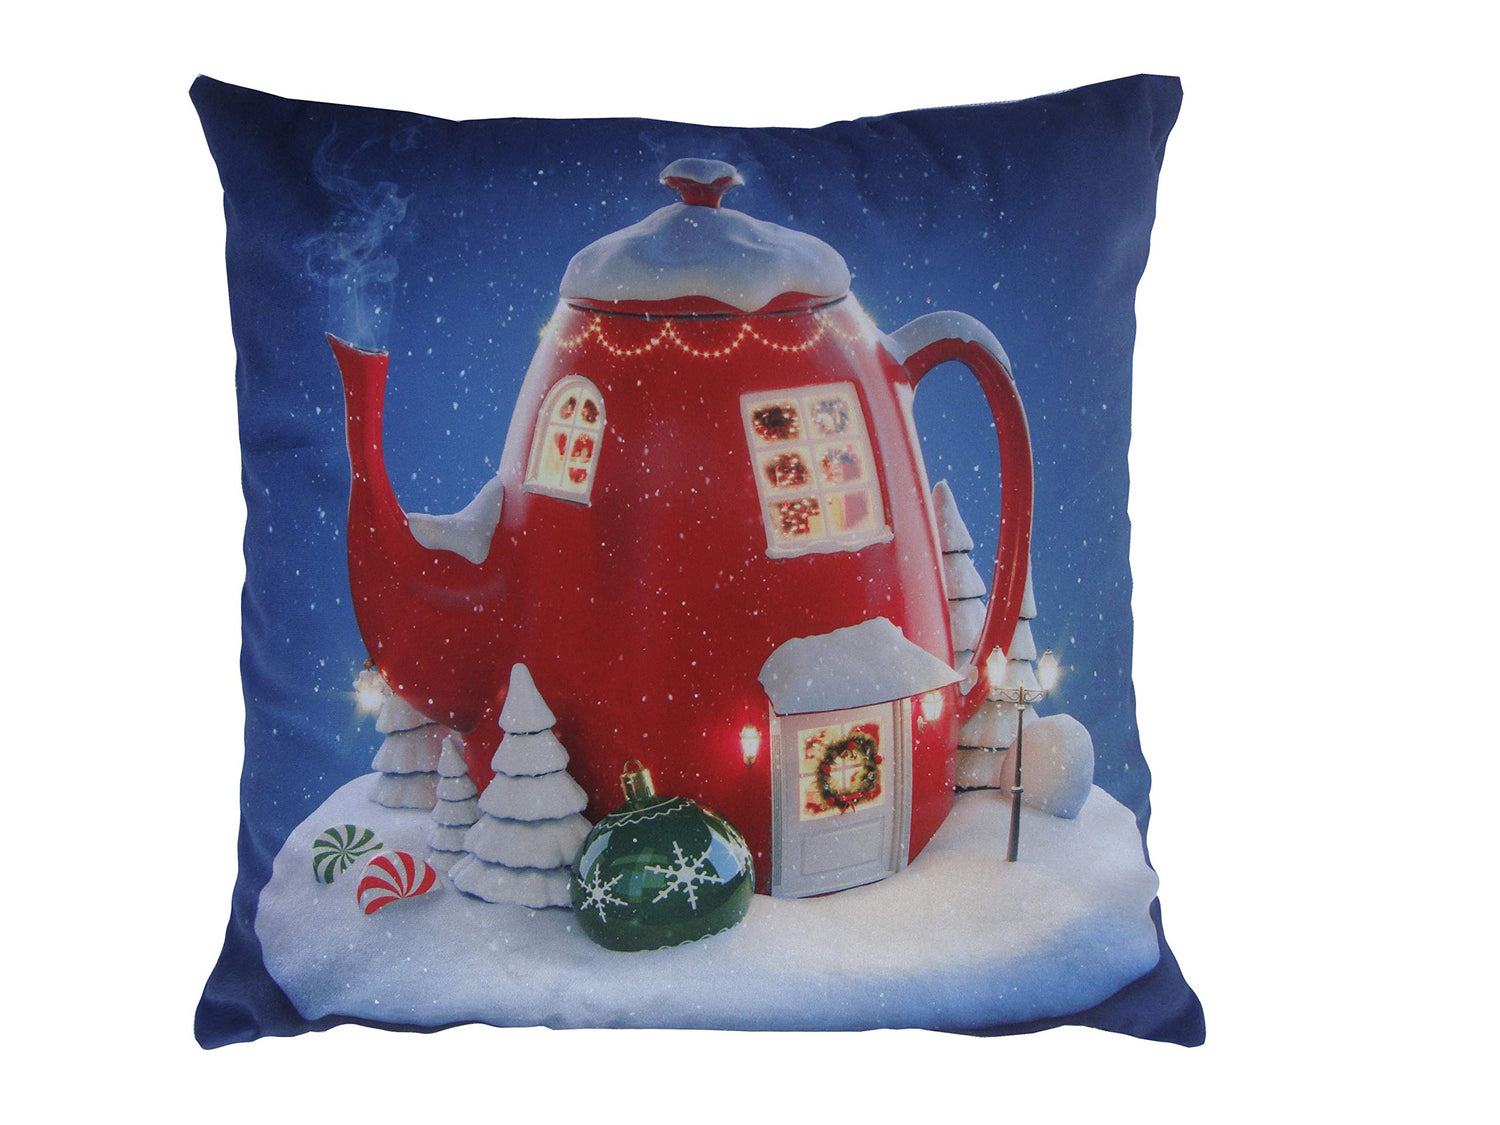 AAYU Christmas Fairy House Design Cushion Covers 18 x 18 Inch Velvet Throw Pillow Cover for Sofa Couch Bed and Home Decor